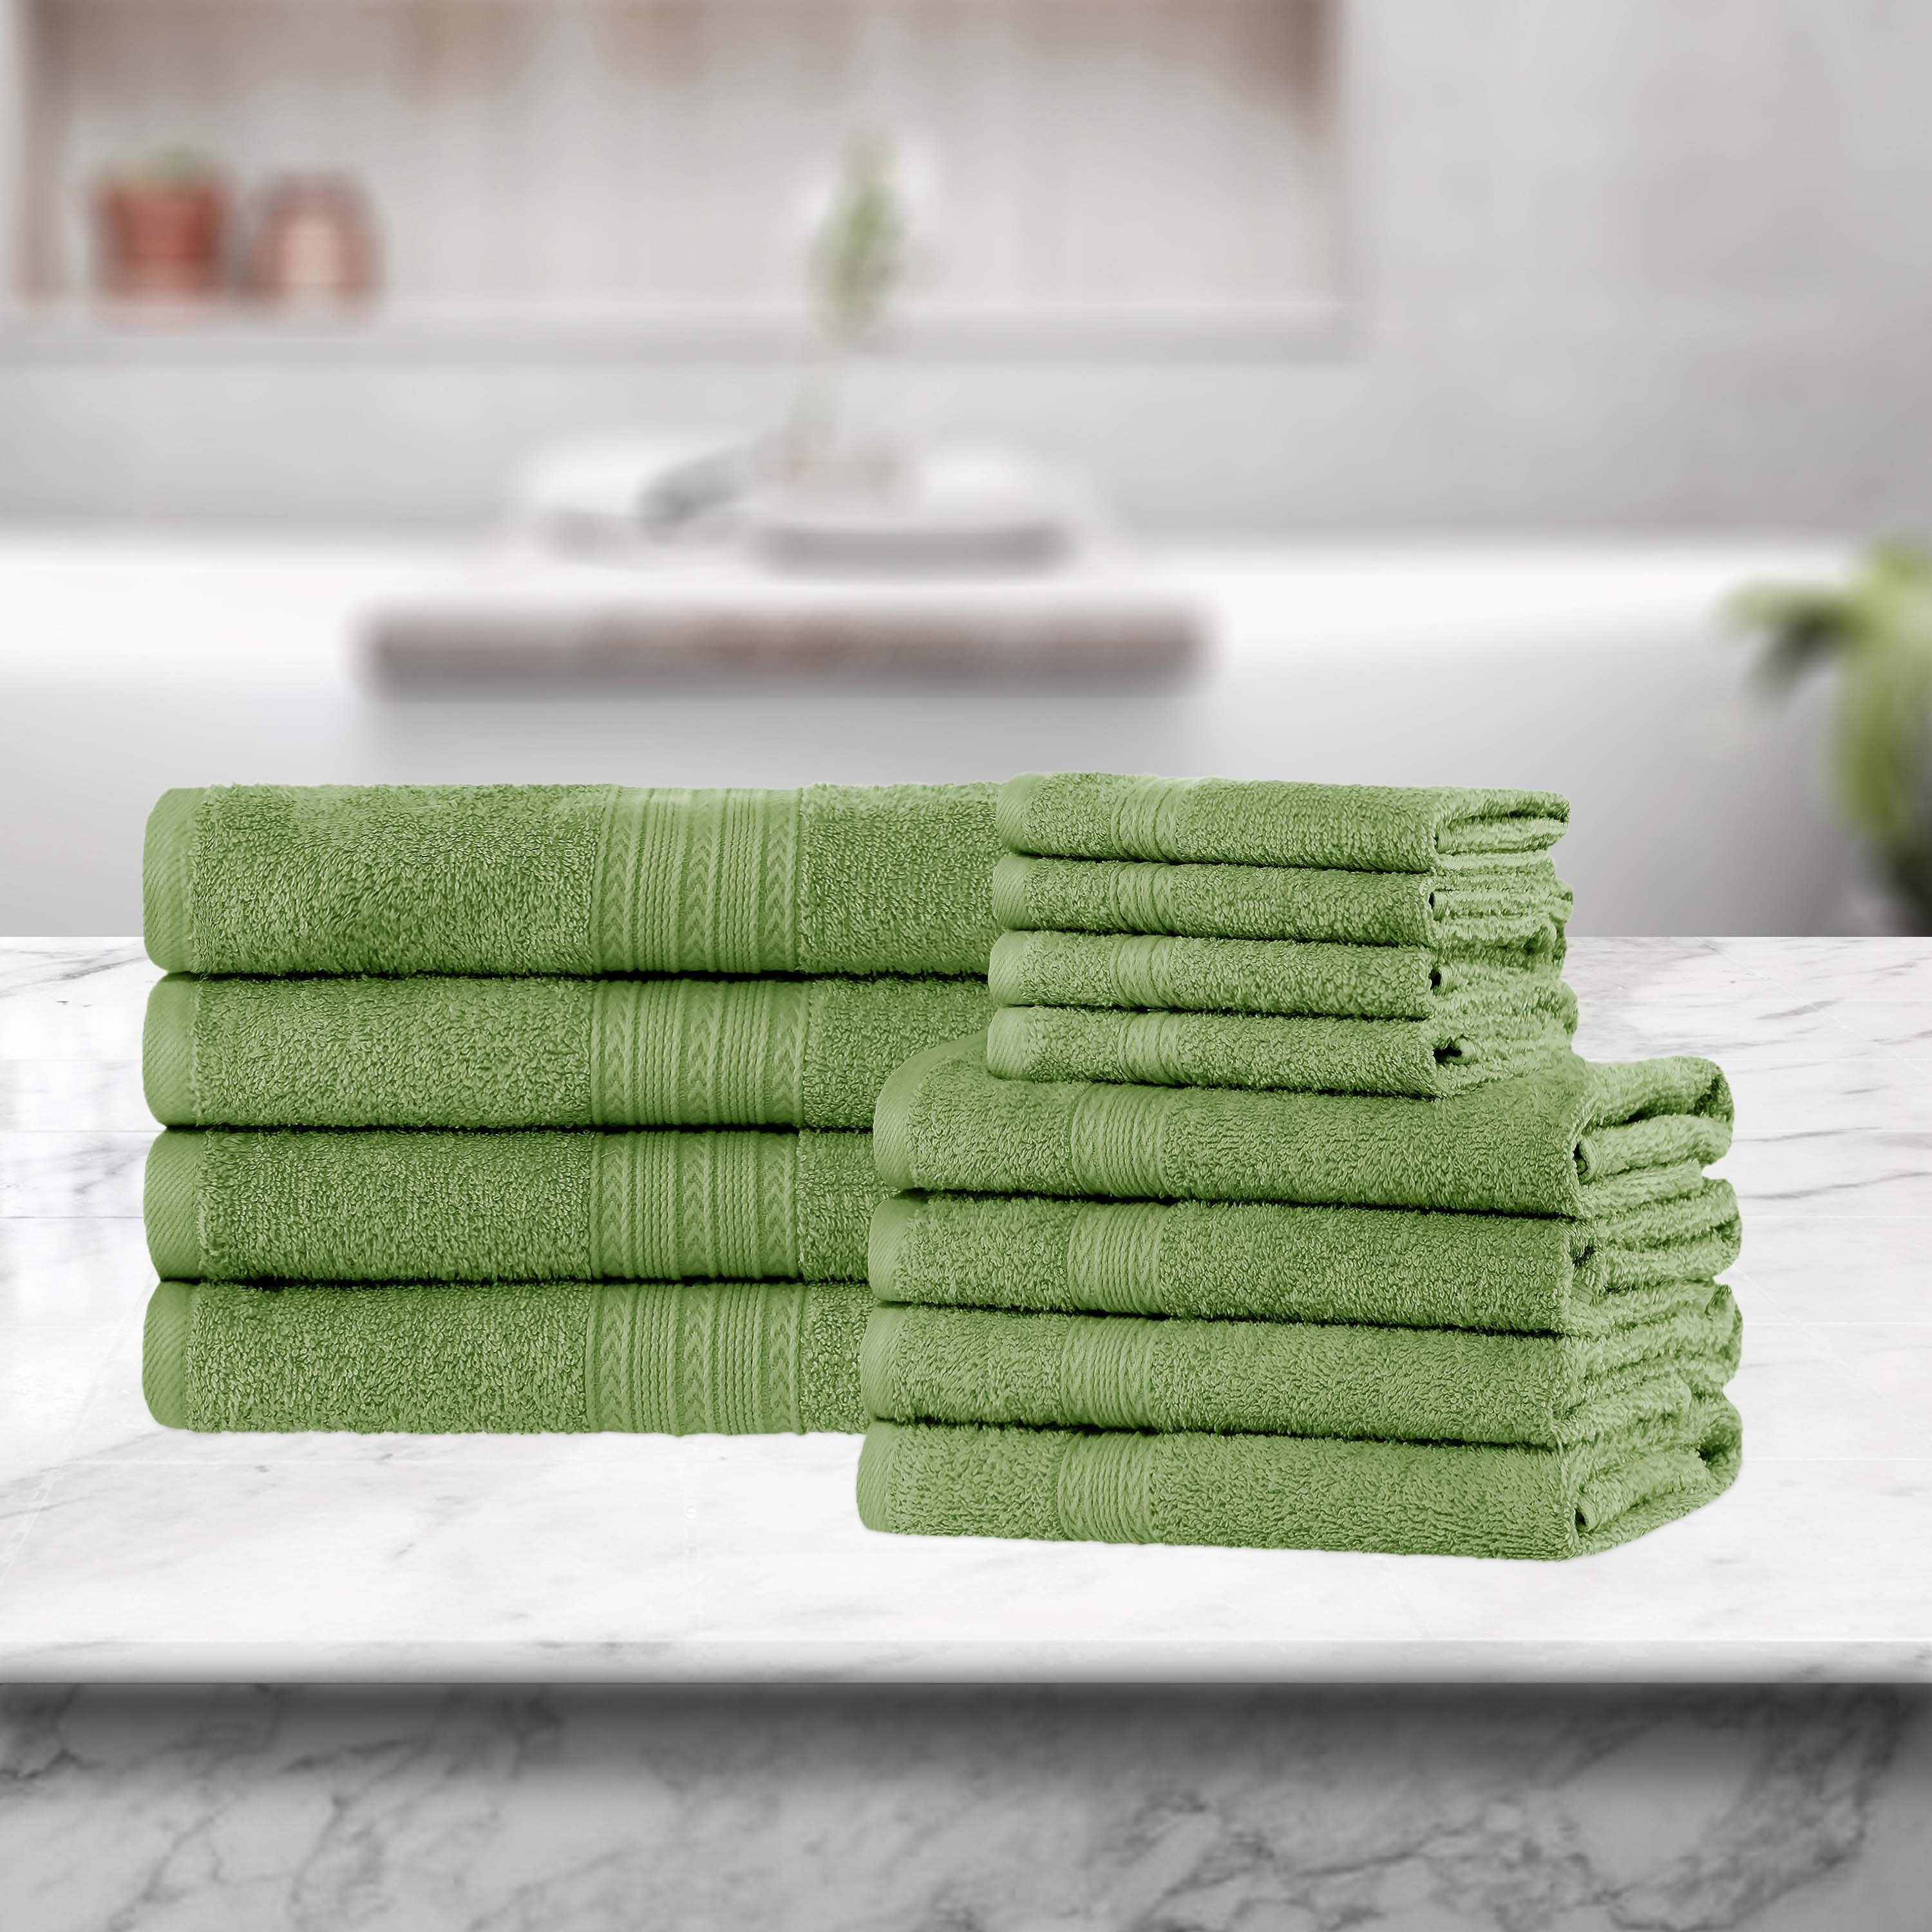 https://ak1.ostkcdn.com/images/products/is/images/direct/8bc7158e4980efabb8b1e6ac83499d29d459b1e1/Eco-Friendly-Sustainable-Cotton-Bathroom-Towel-Set-of-12-by-Superior.jpg